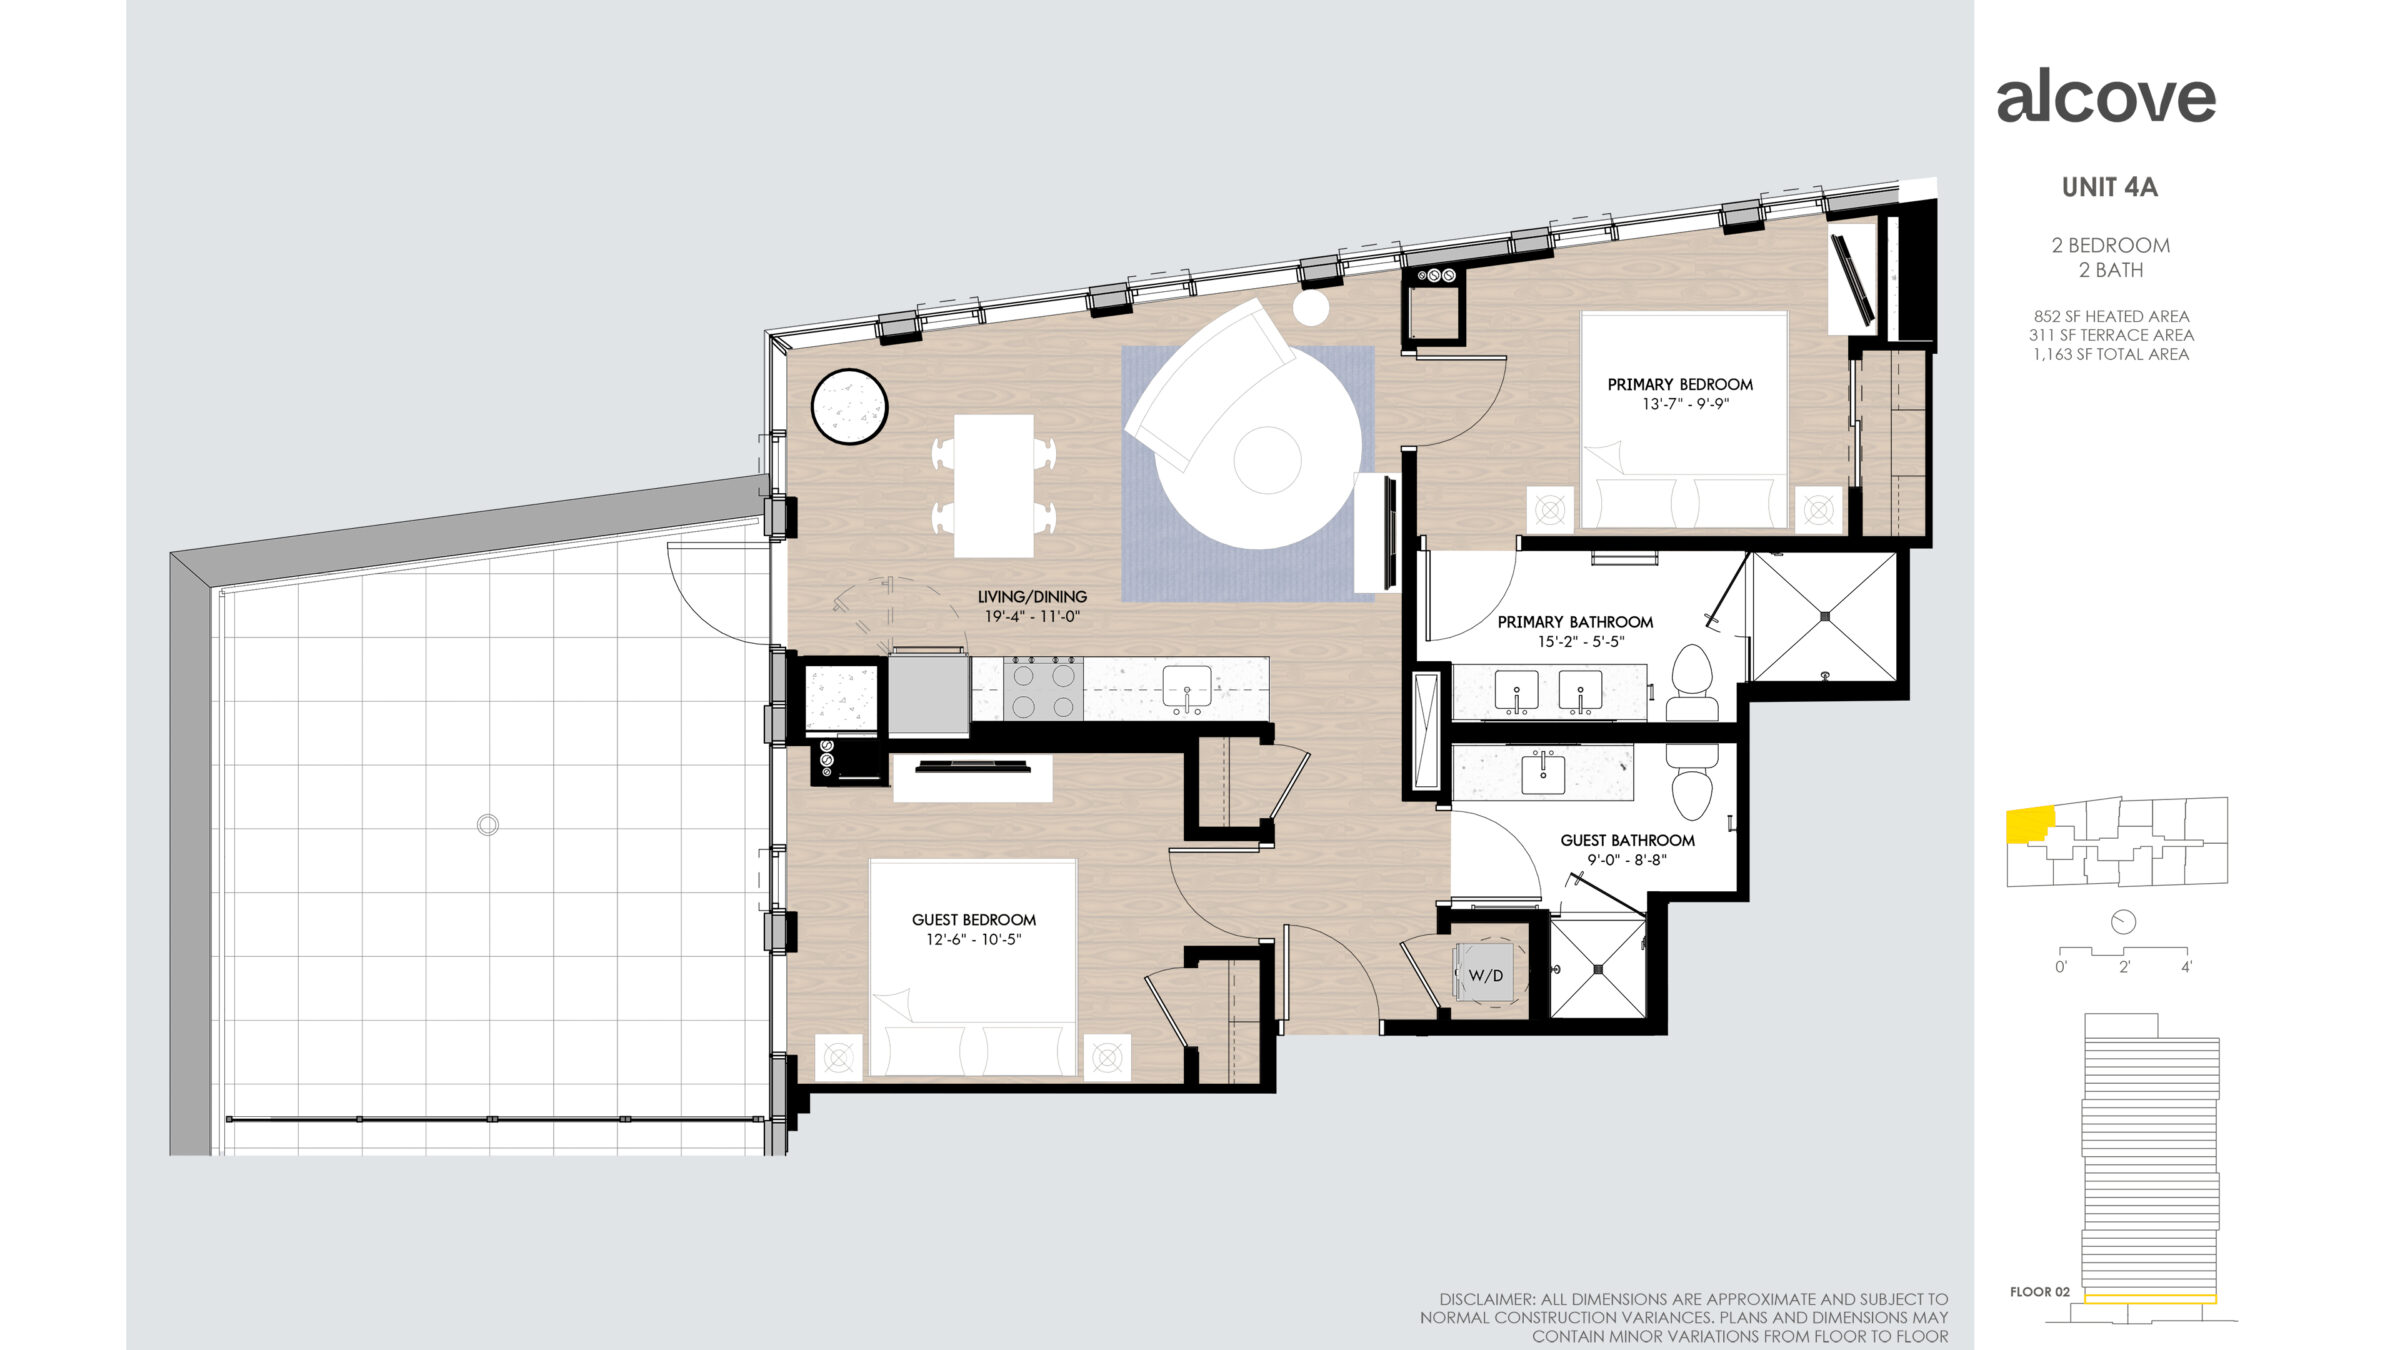 Image Reads: UNIT 4A 2 BEDROOM 2 BATH 852 SF HEATED AREA 311 SF TERRACE AREA 1163 SF TOTAL AREA Floor 02 Disclaimer: all dimensions are approximate and subject to normal construction variances. Plans and dimensions may contain minor variations from floor to floor.